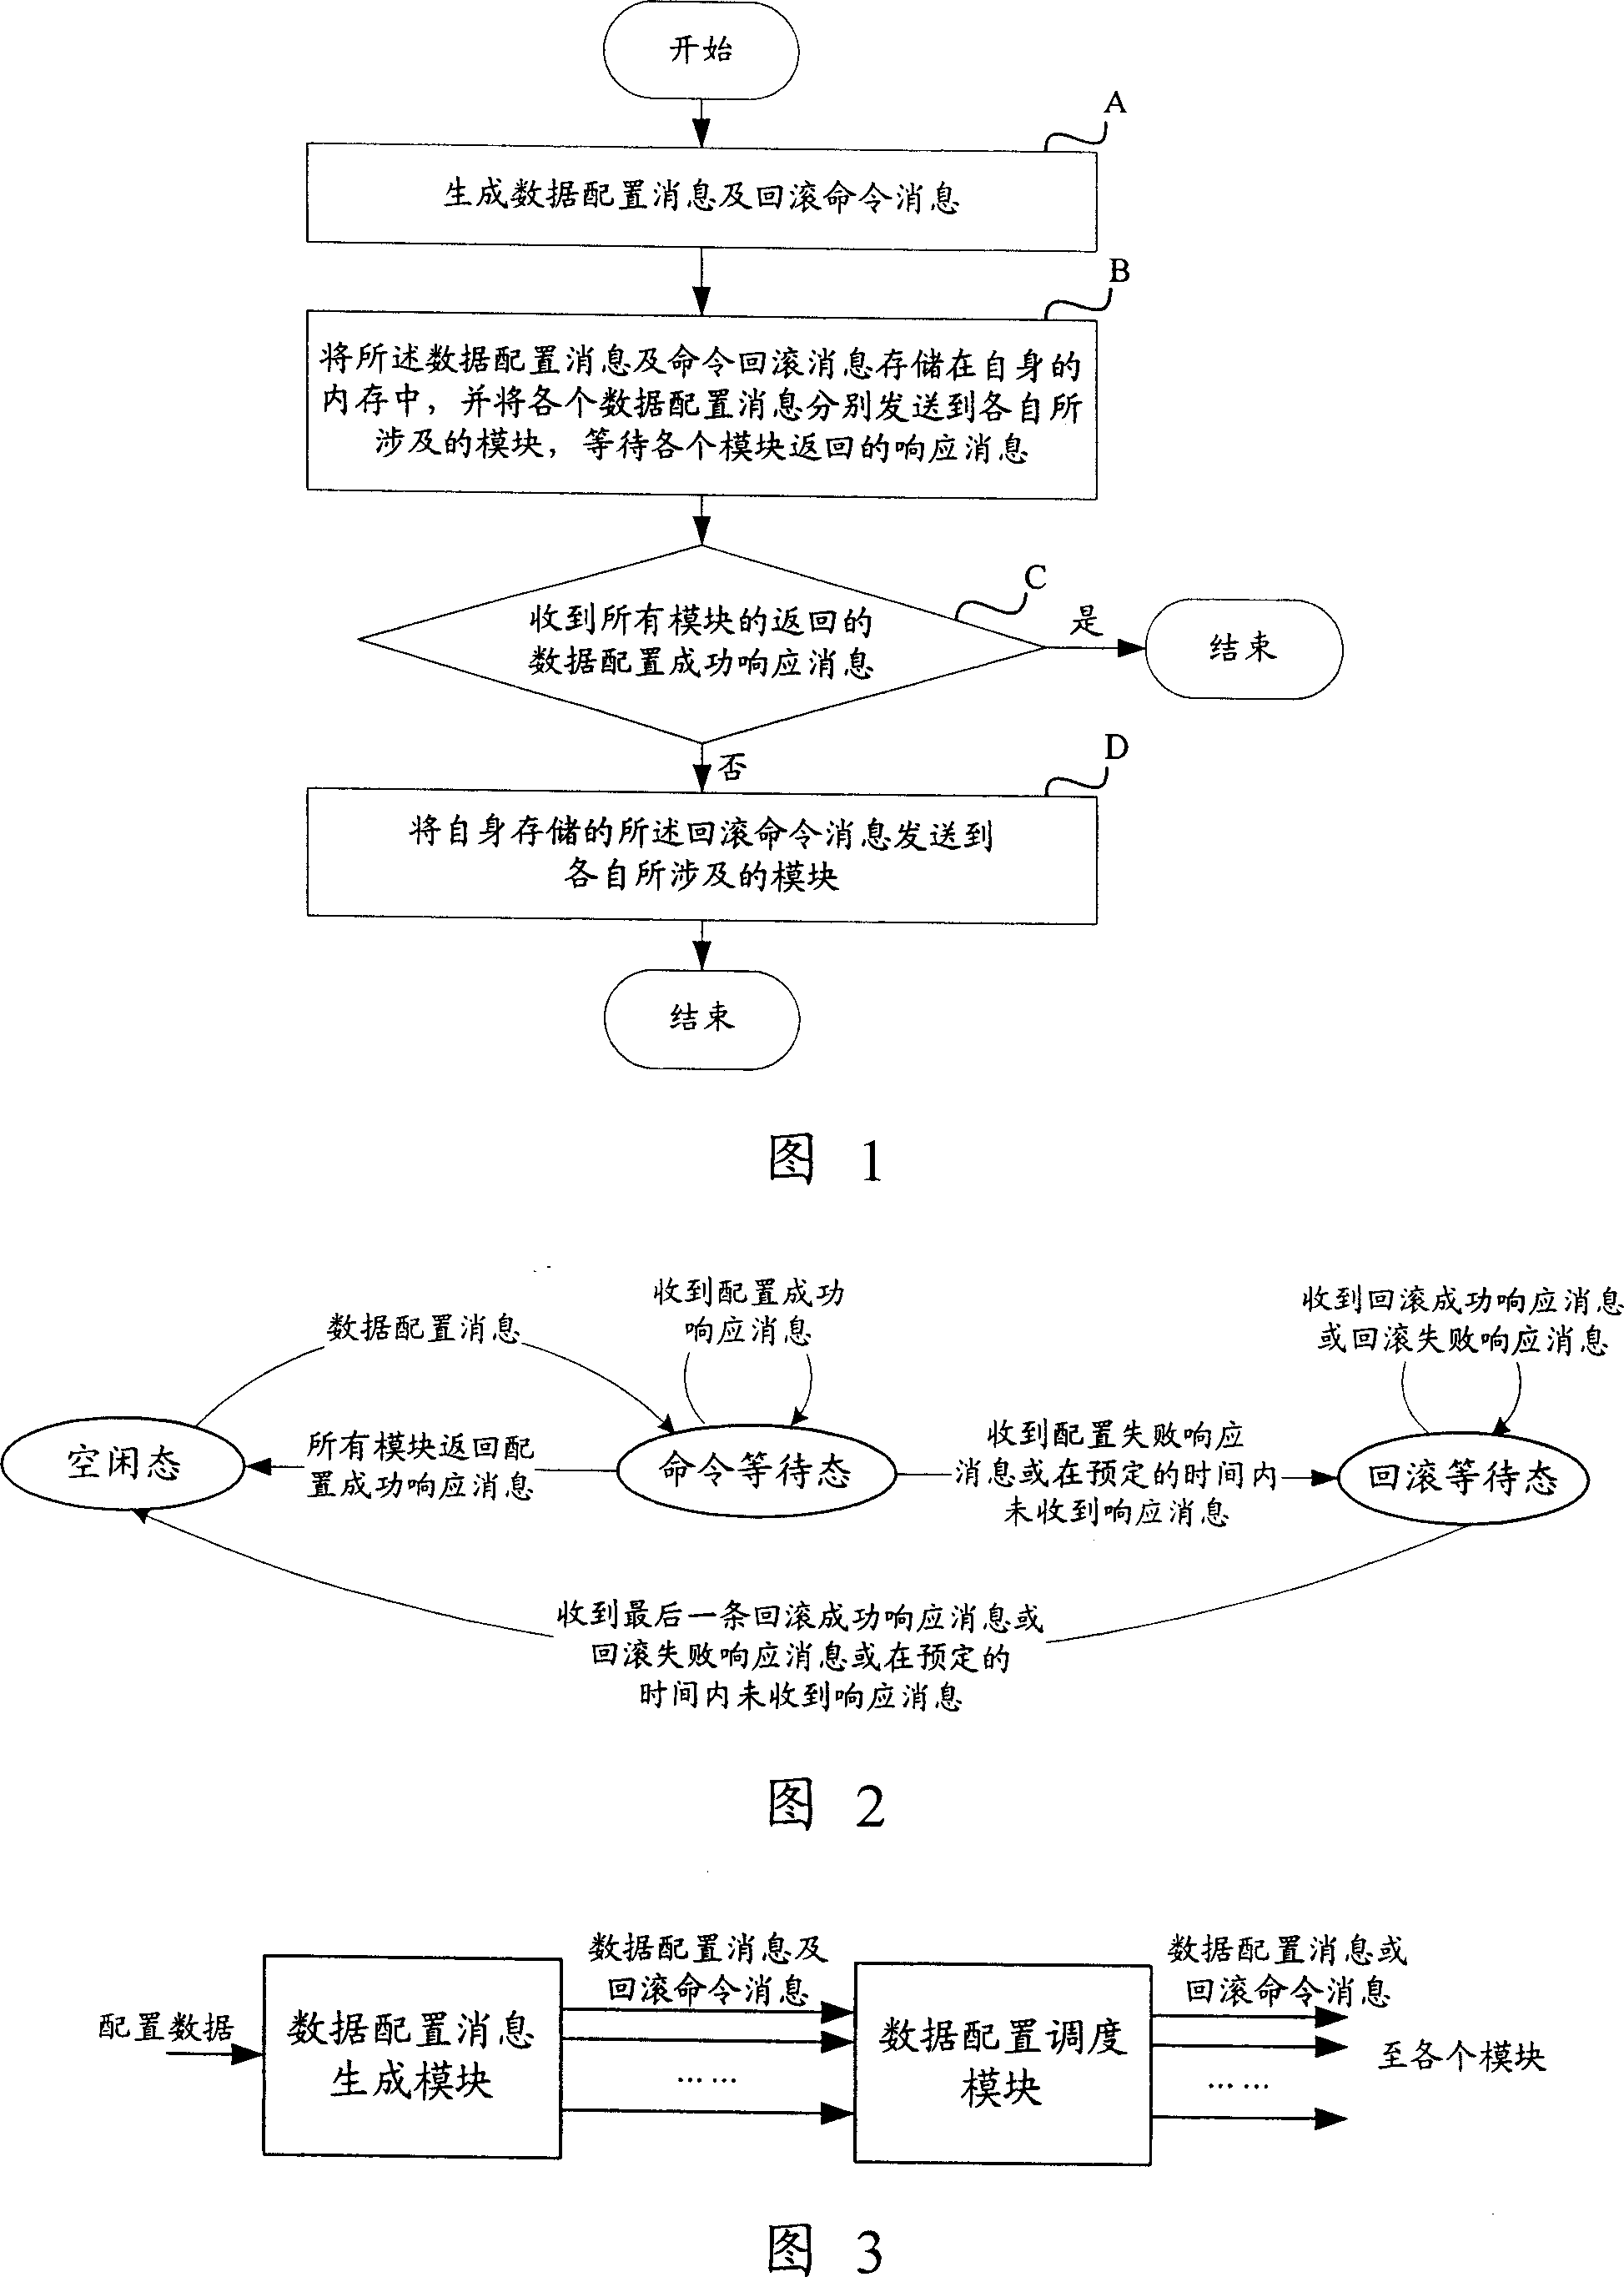 Method and device for arranging data